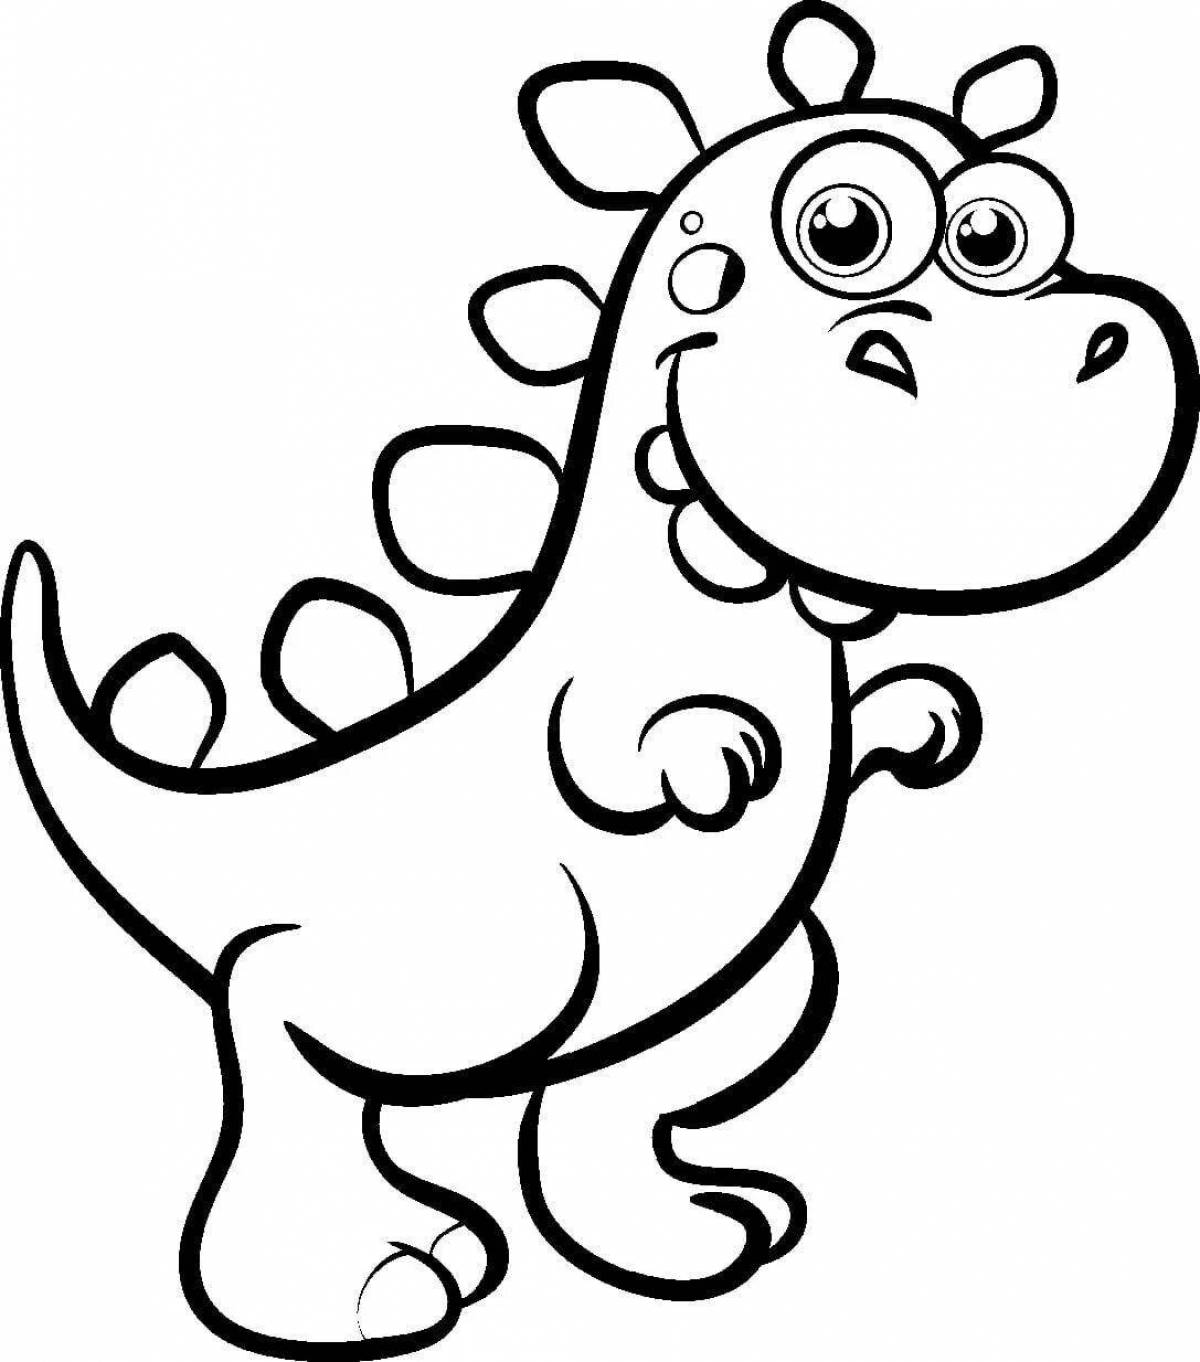 Wonderful dinosaurs coloring book for 4-5 year olds